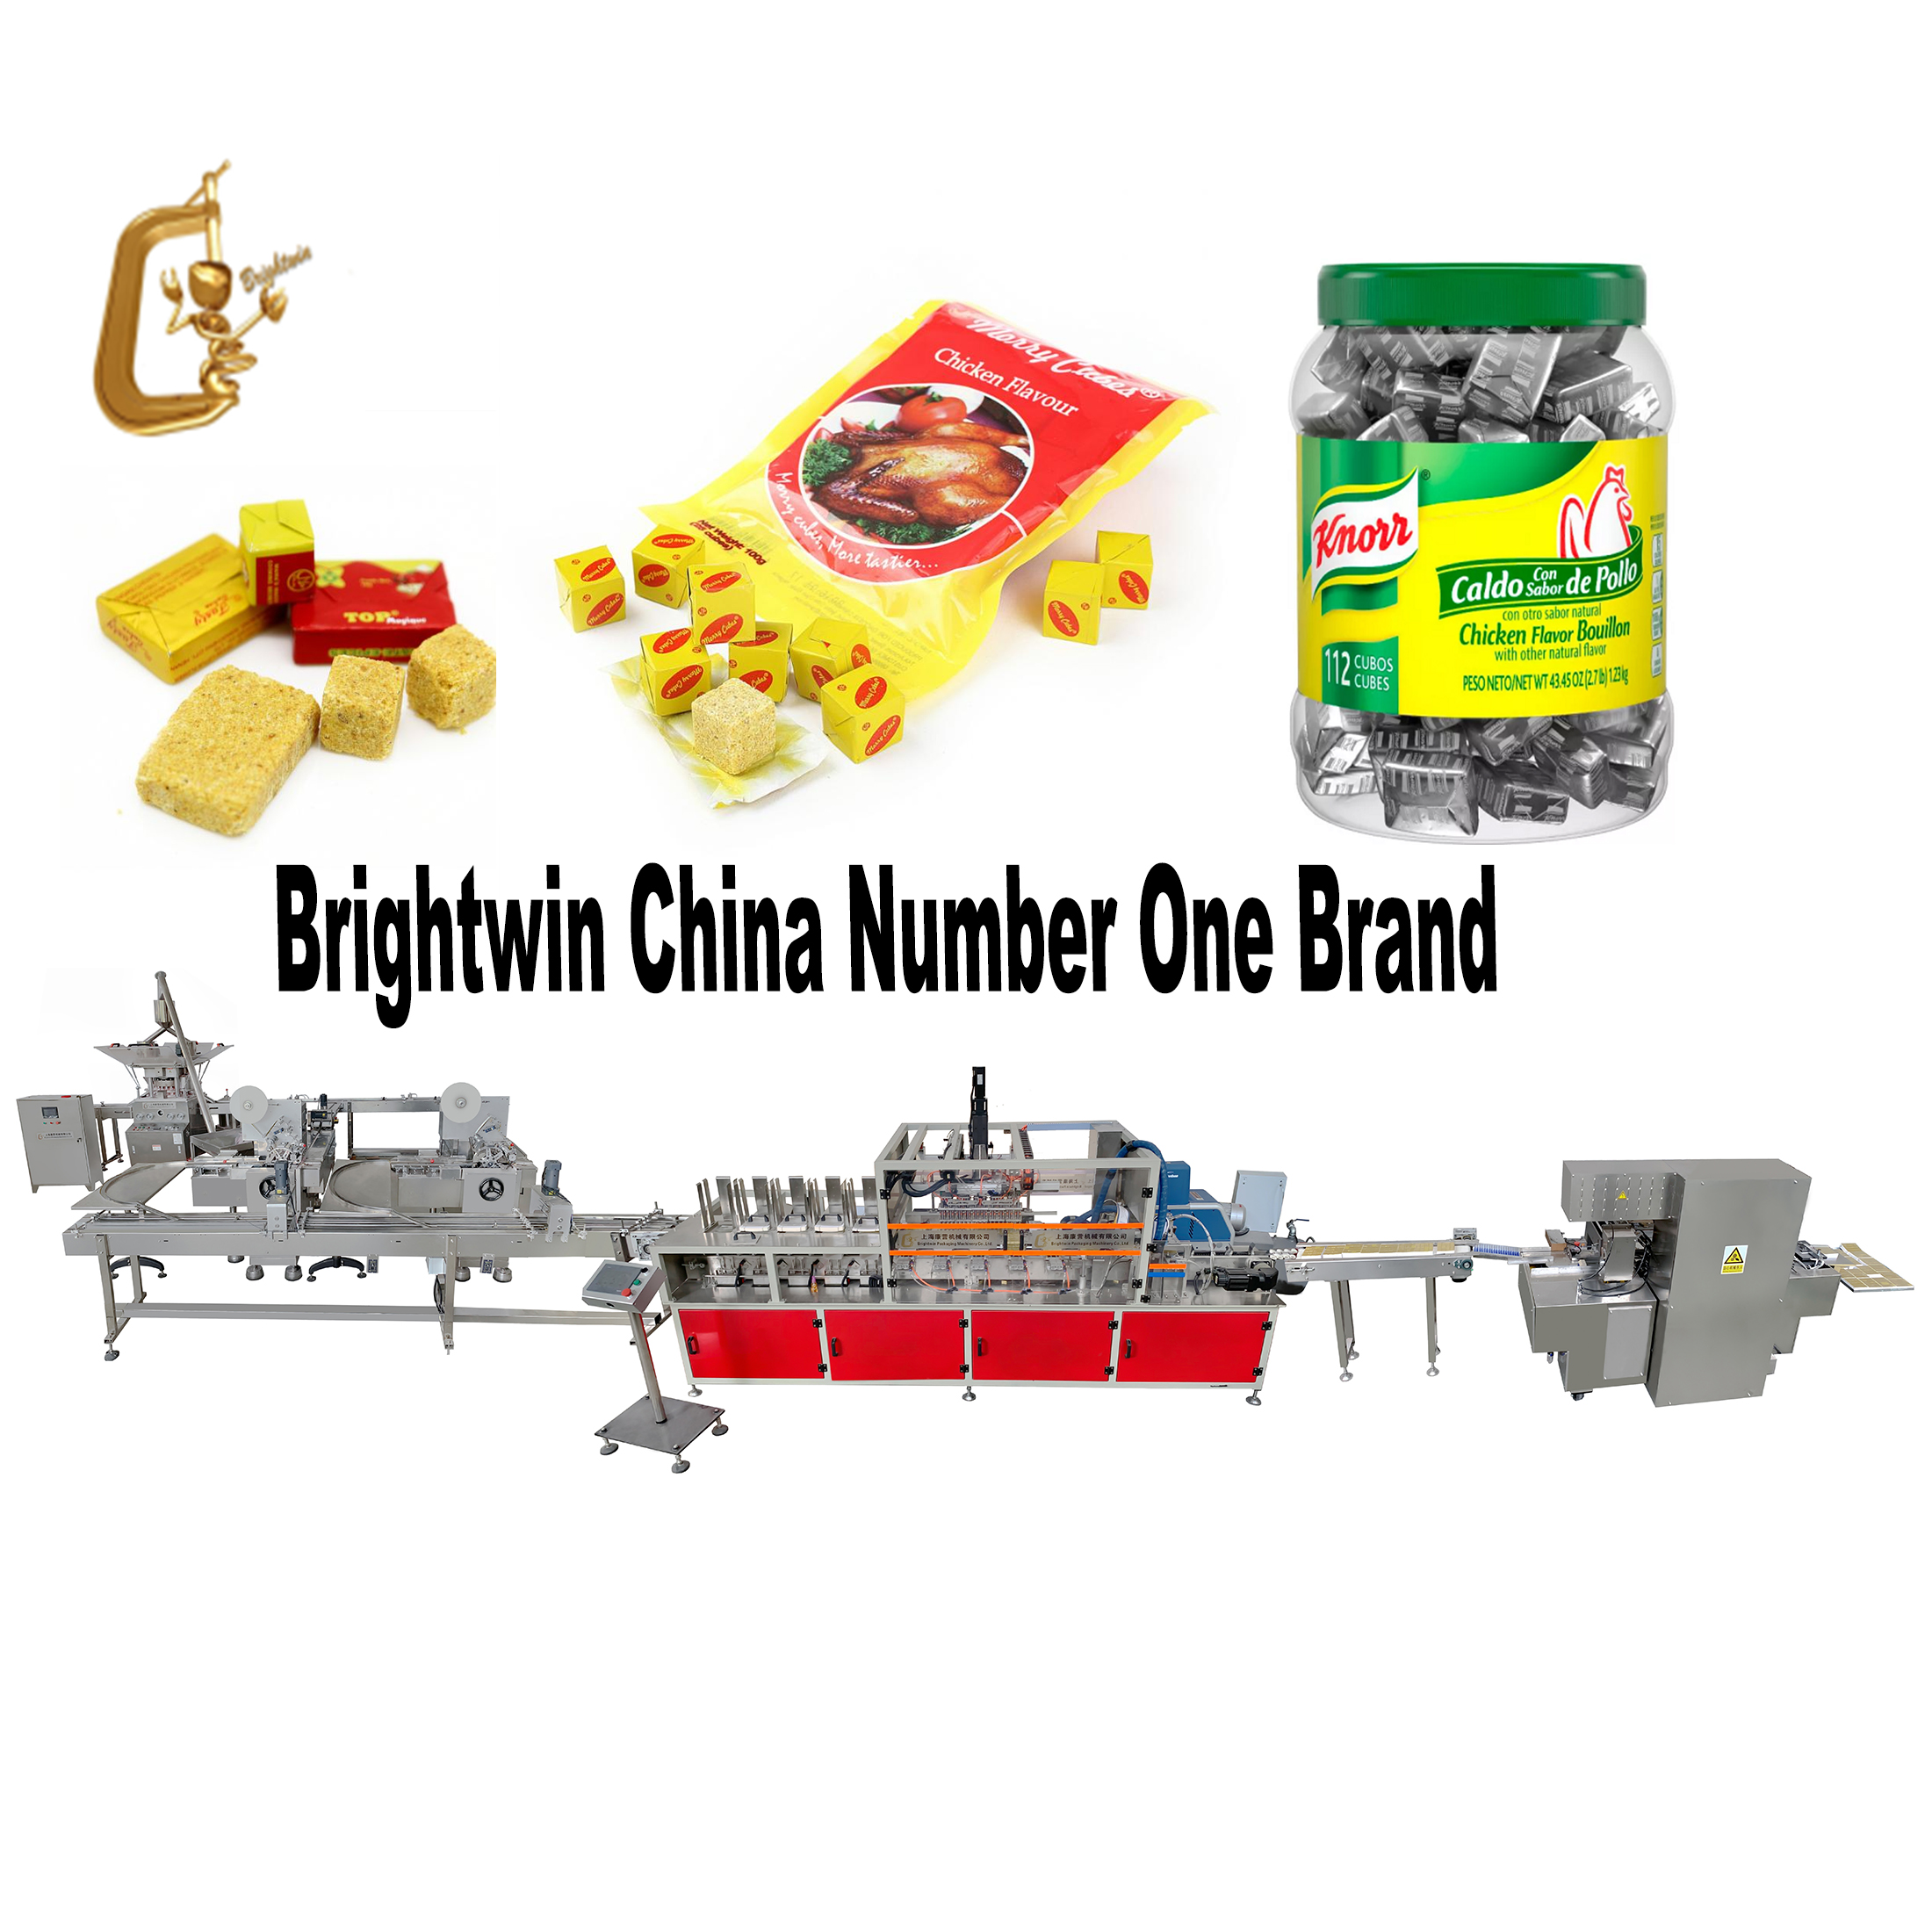 Brightwin Manufacture Chicken Broth Seasoning Powder Pressing Machine Bouillon Cube Chicken Stock 4g 10g 12g Wrapping Boxing Machine Featured Image